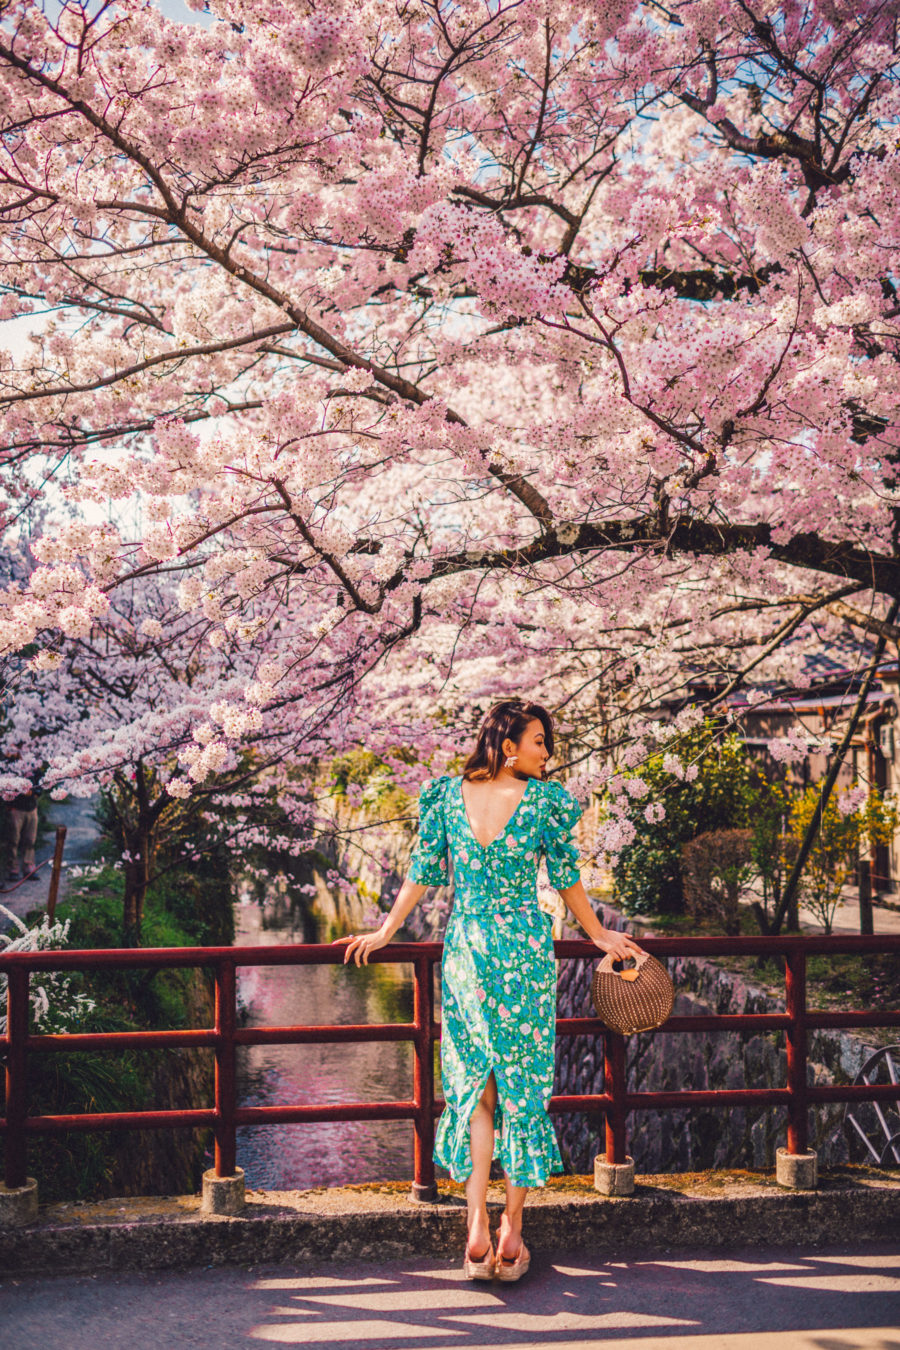 7 Best Spots for Cherry Blossoms in Japan - Kyoto - Philosopher Path, luxury travel blogger // Notjessfashion.com